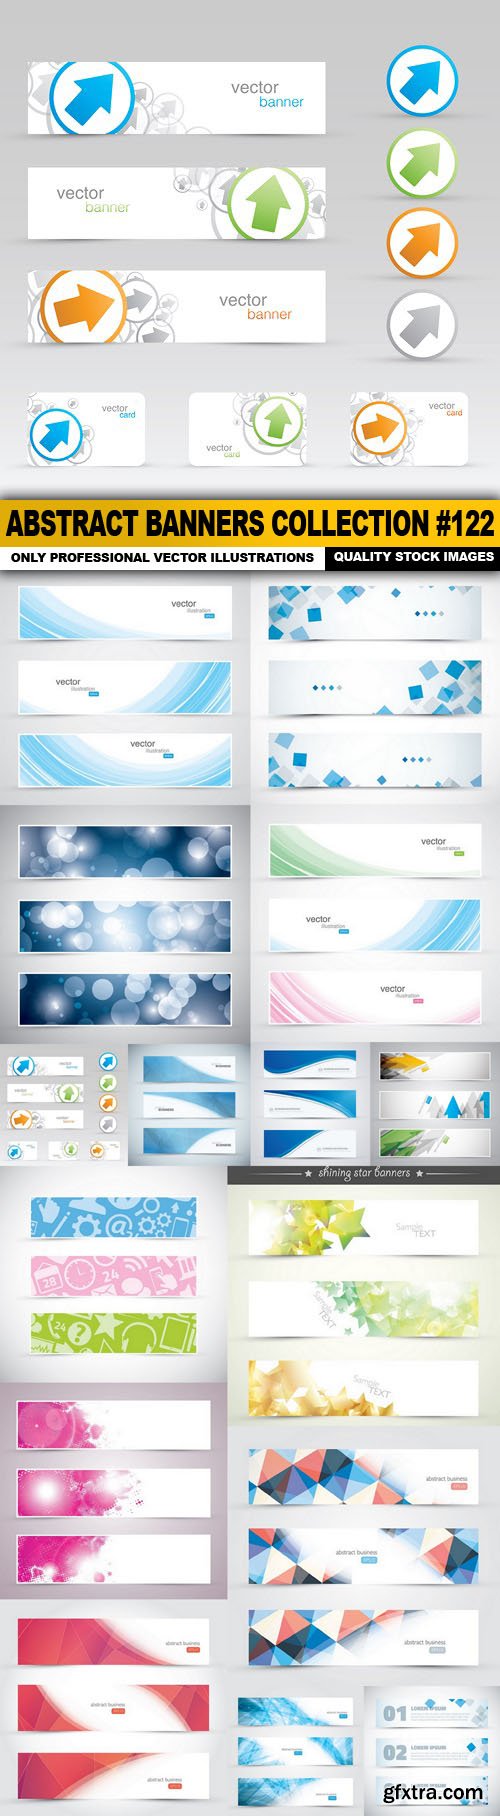 Abstract Banners Collection #122 - 15 Vectors